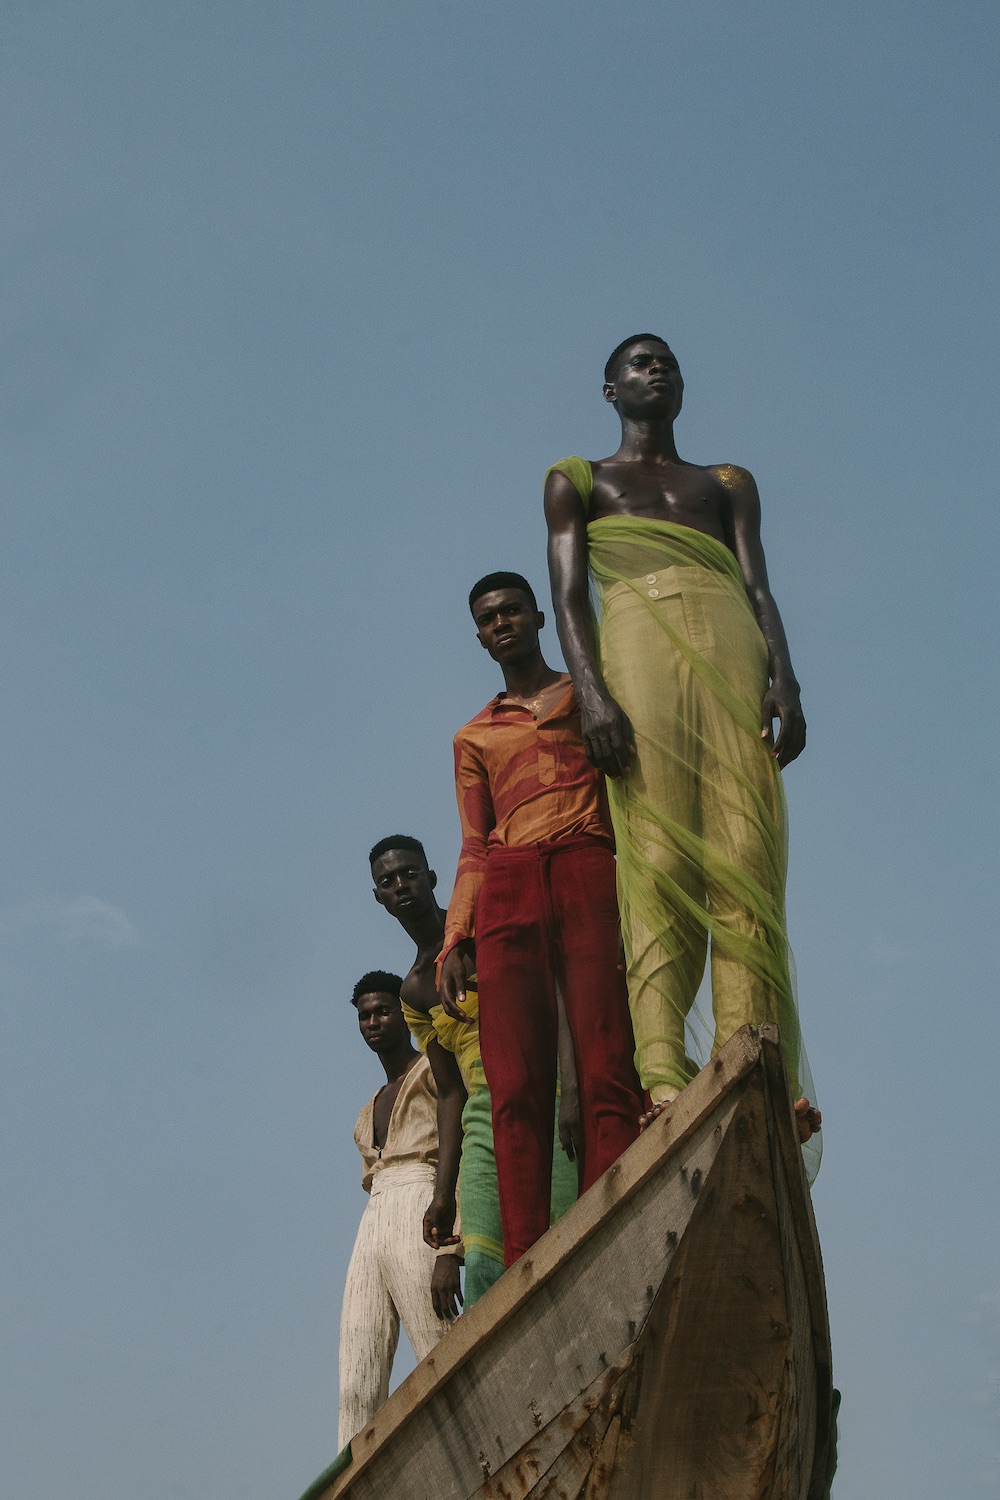 Daniel Obasi, "Moments of Youth," Lagos, Nigeria, 2019. Courtesy to the artist and Les Rencontres d’Arles.